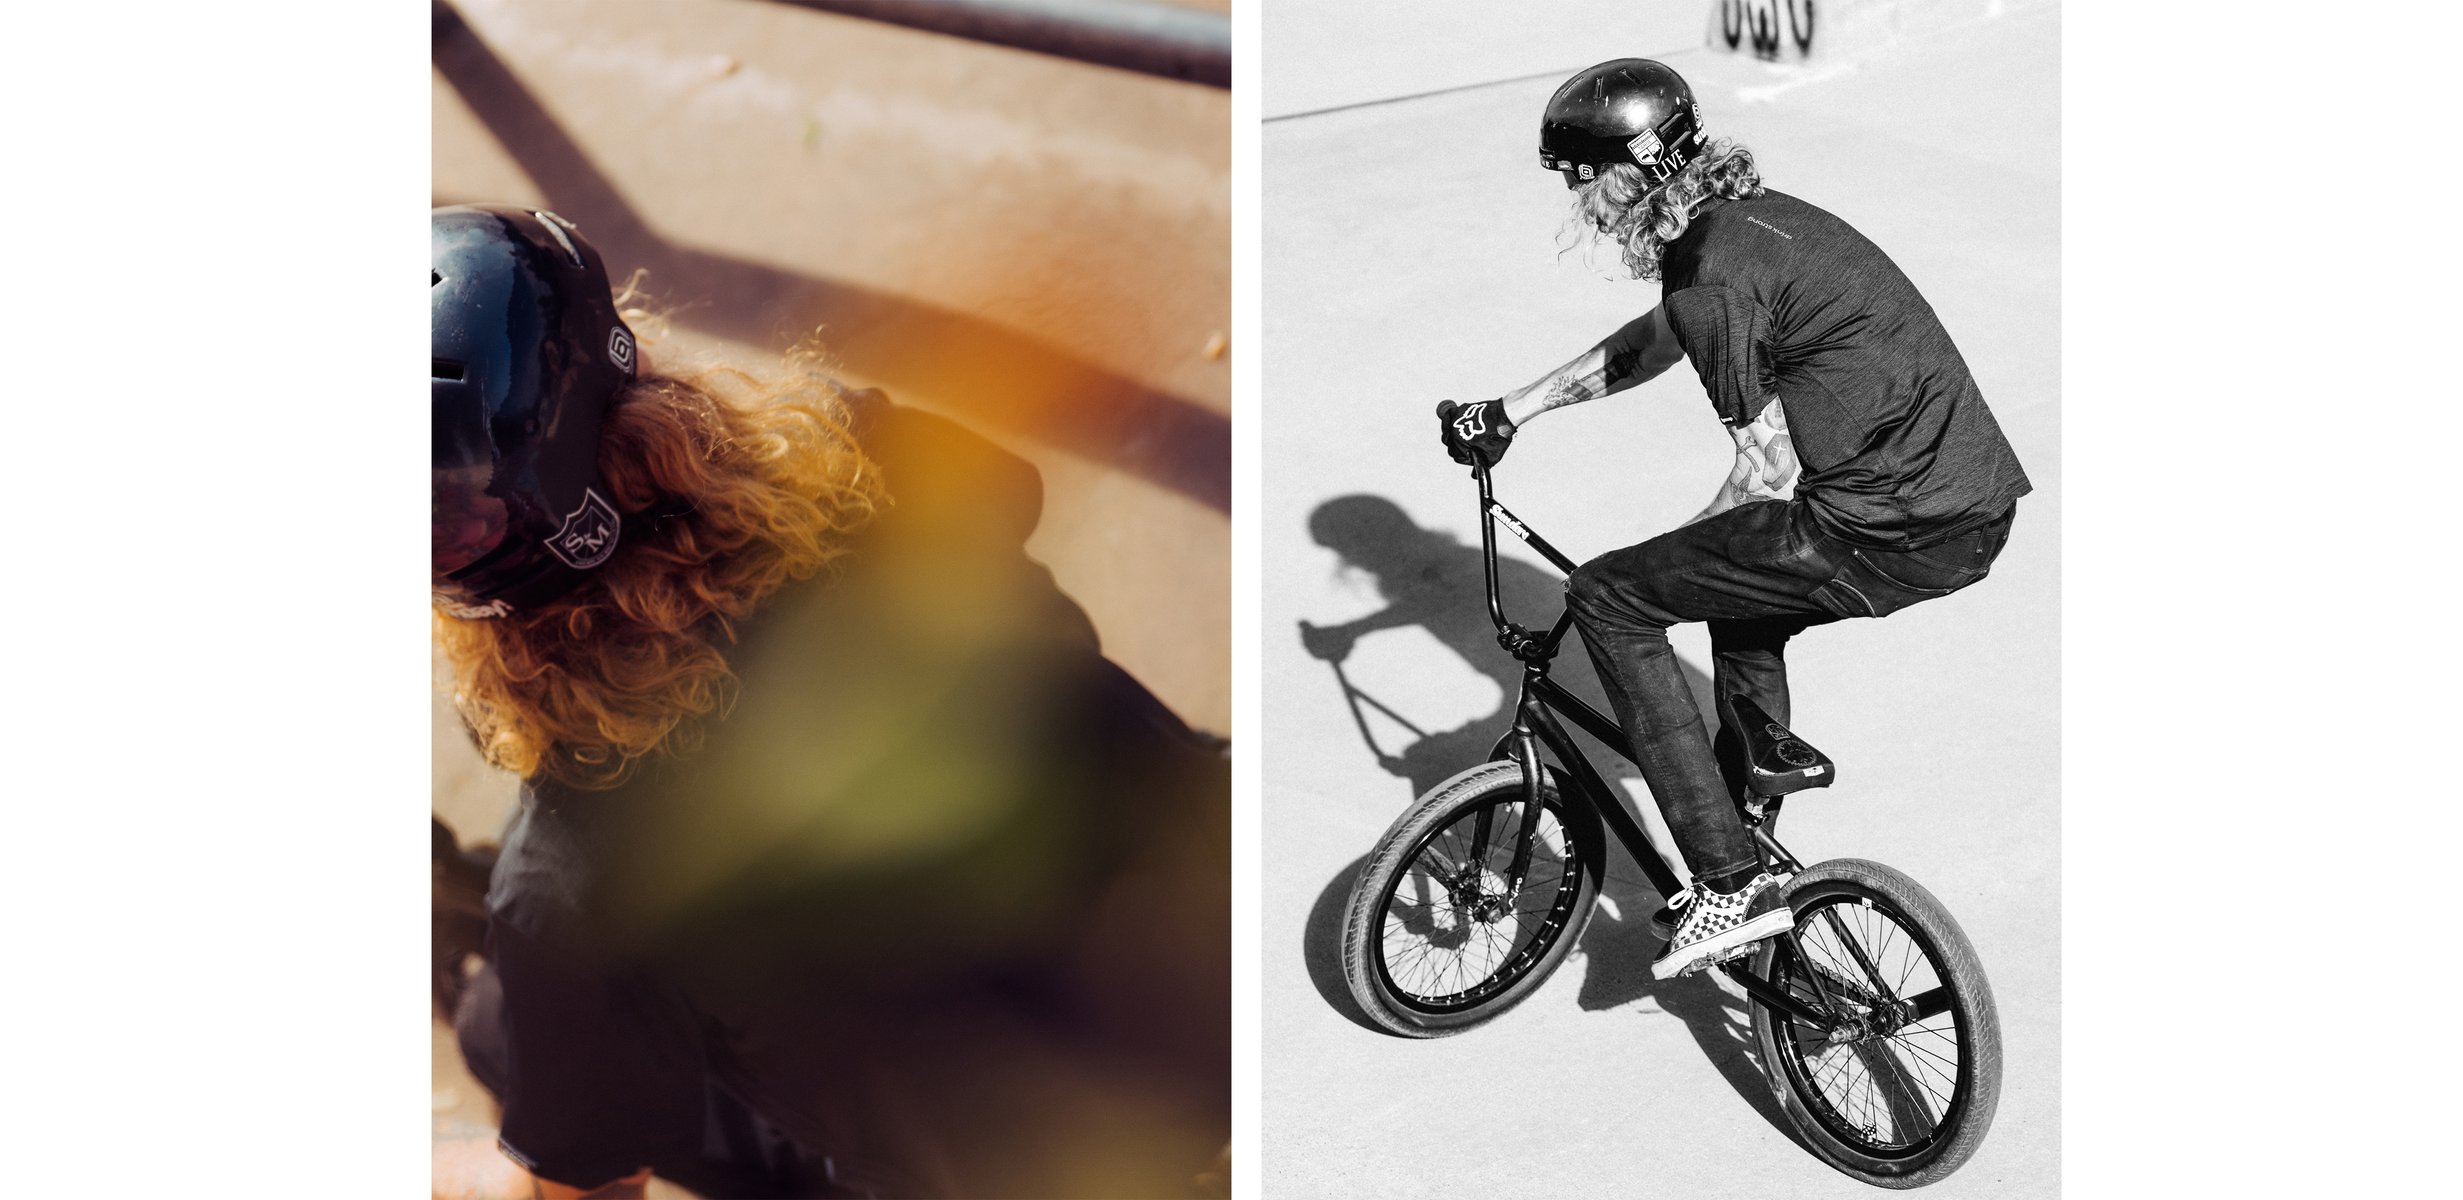  Diptych:

Left image: a photo of a bmx rider's back, helmet, and curly red hair, all slightly obscured by the golden leaves of a tree branch.

Right image: a black and white image of the same biker pedaling backwards in a circle in the harsh, bright sun. by Sydney SG